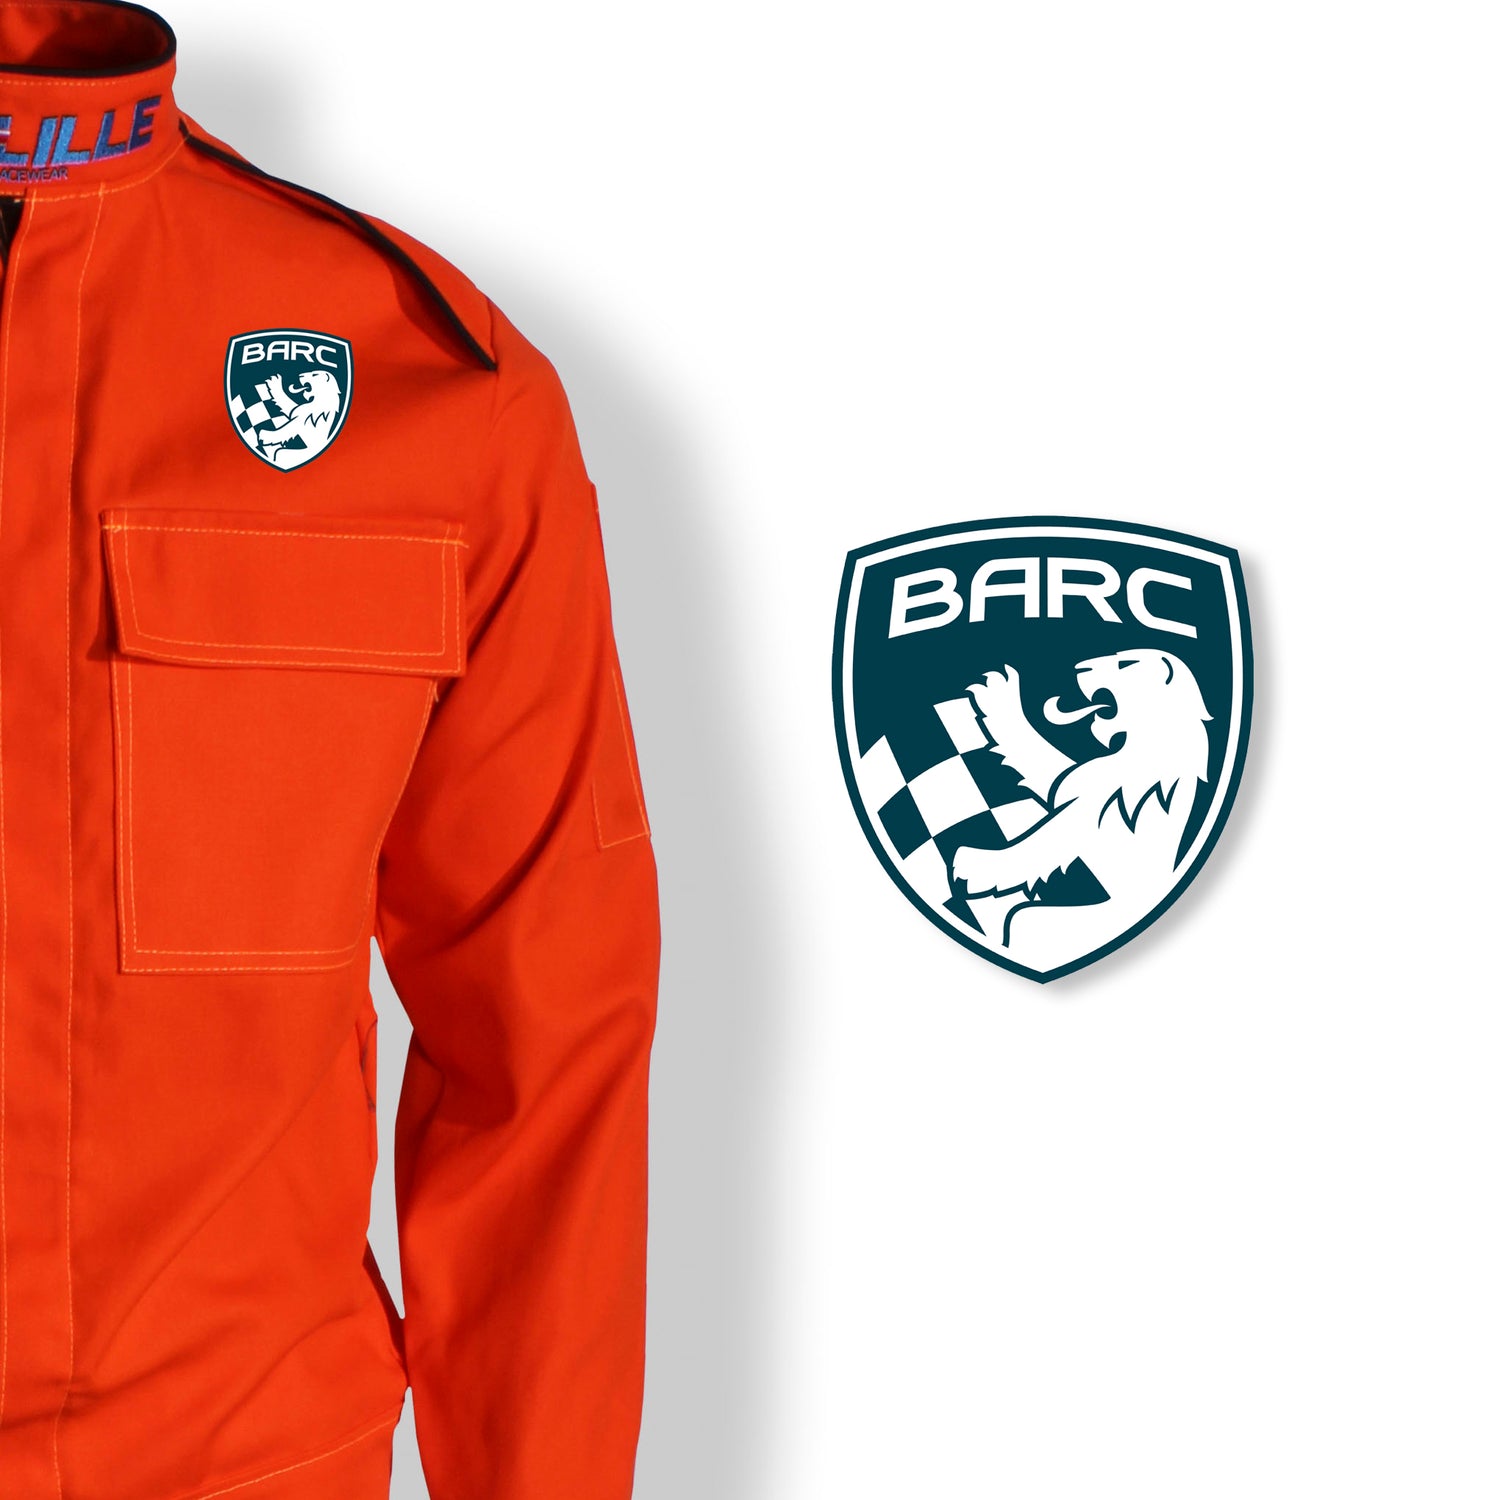 BARC Marshal Suits